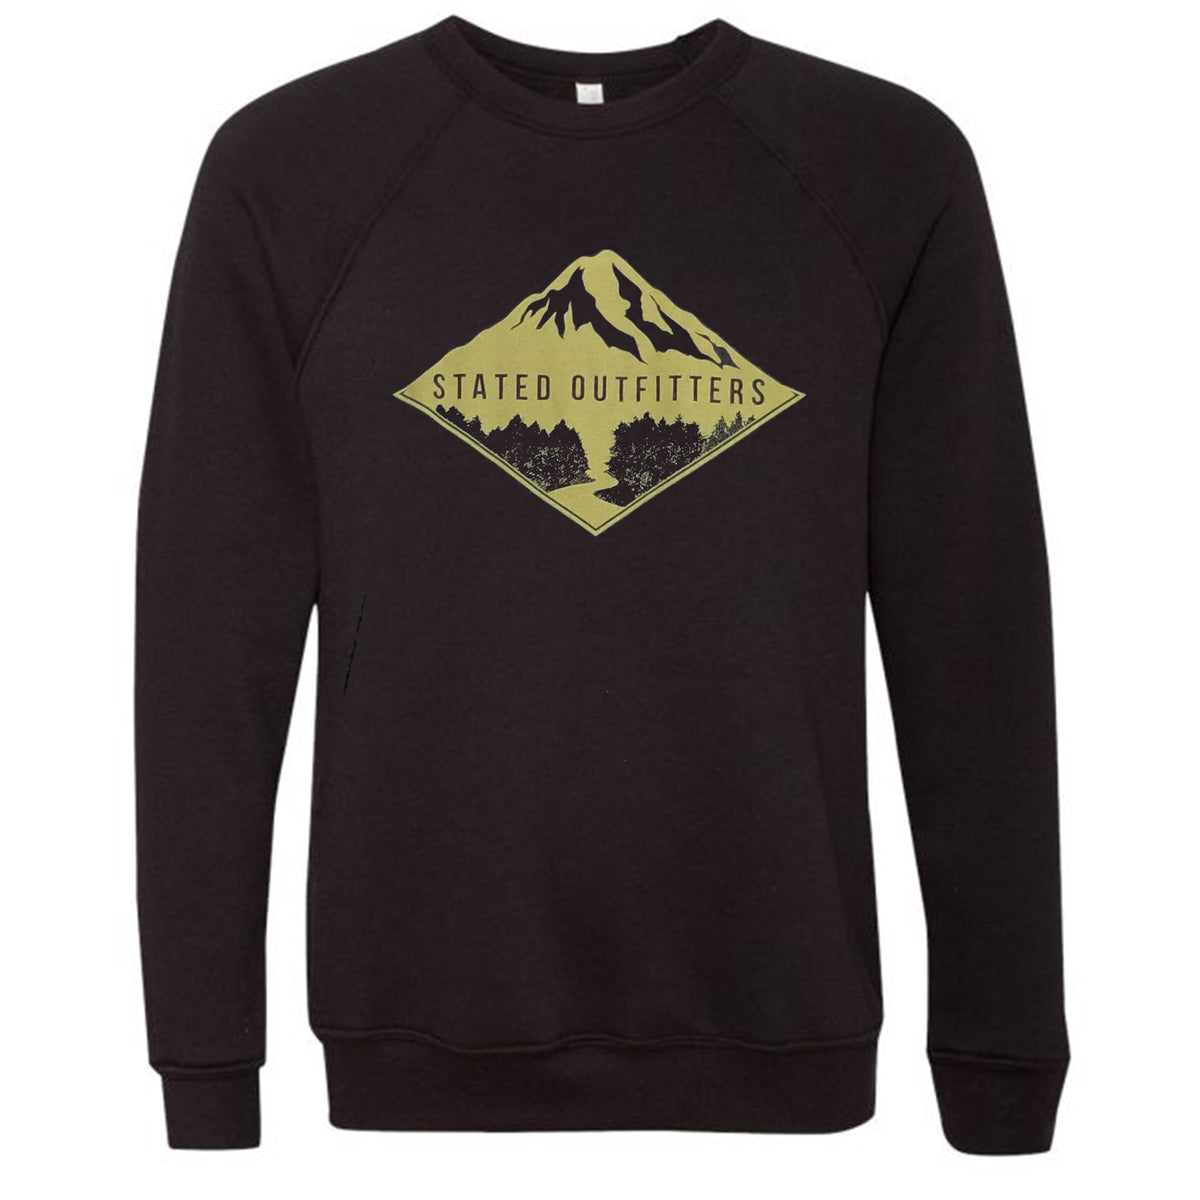 Stated Outfitters Mountain Sweatshirt